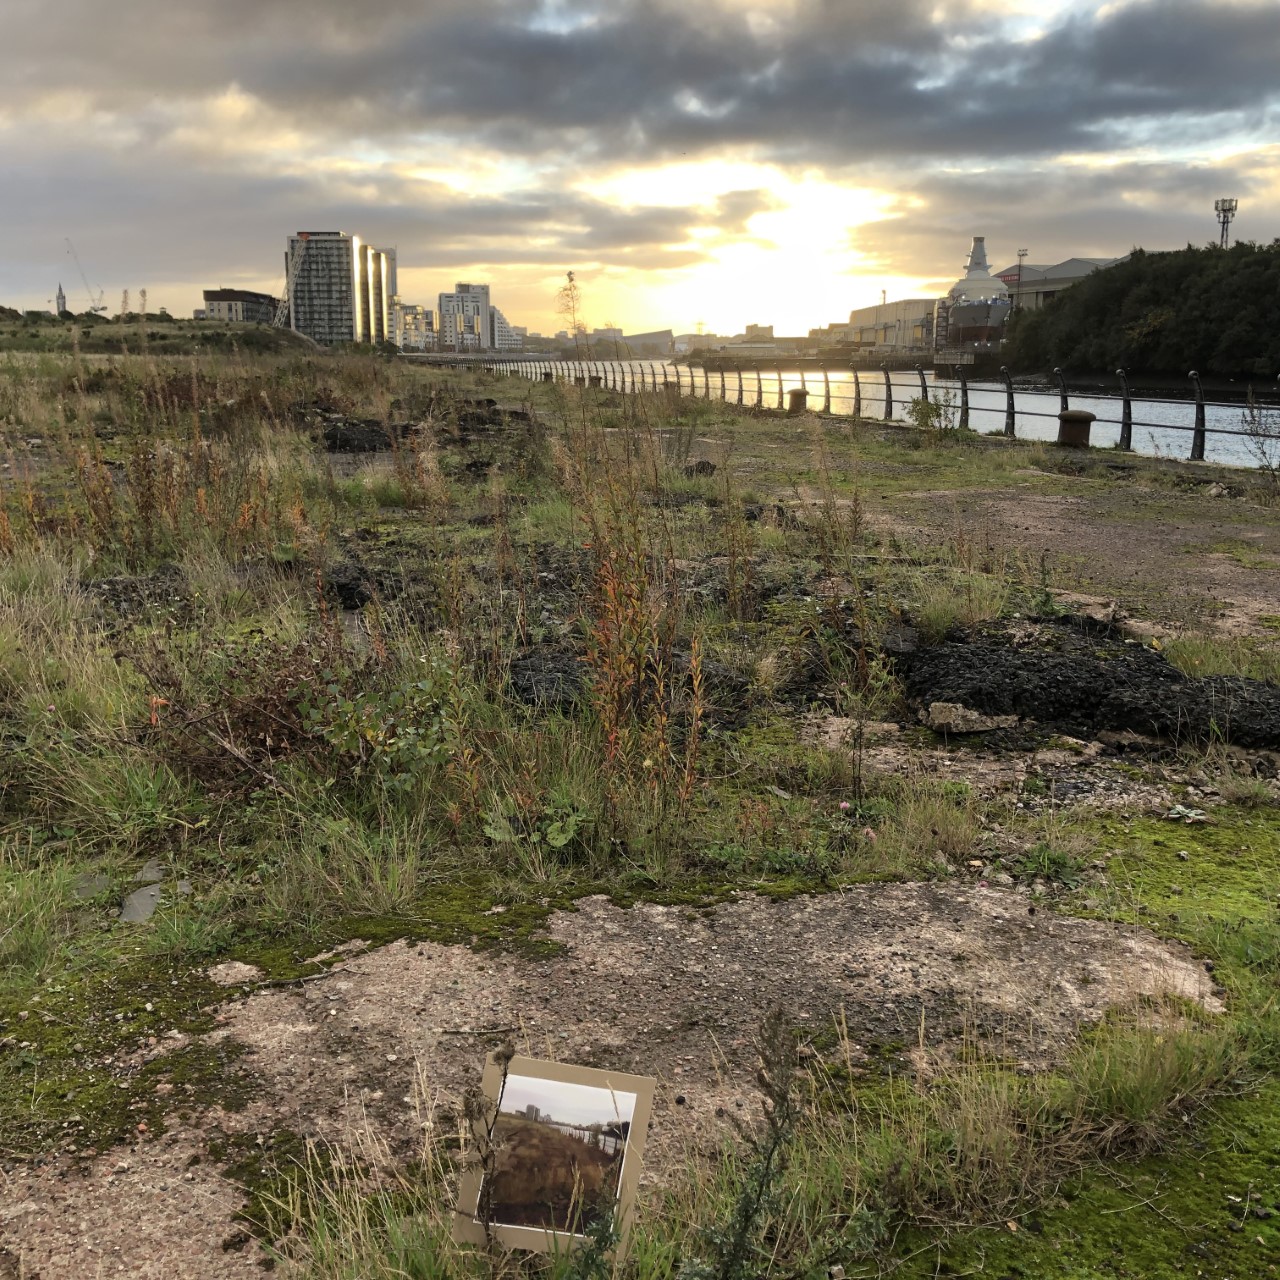 Post-industrial landscape by the River Clyde